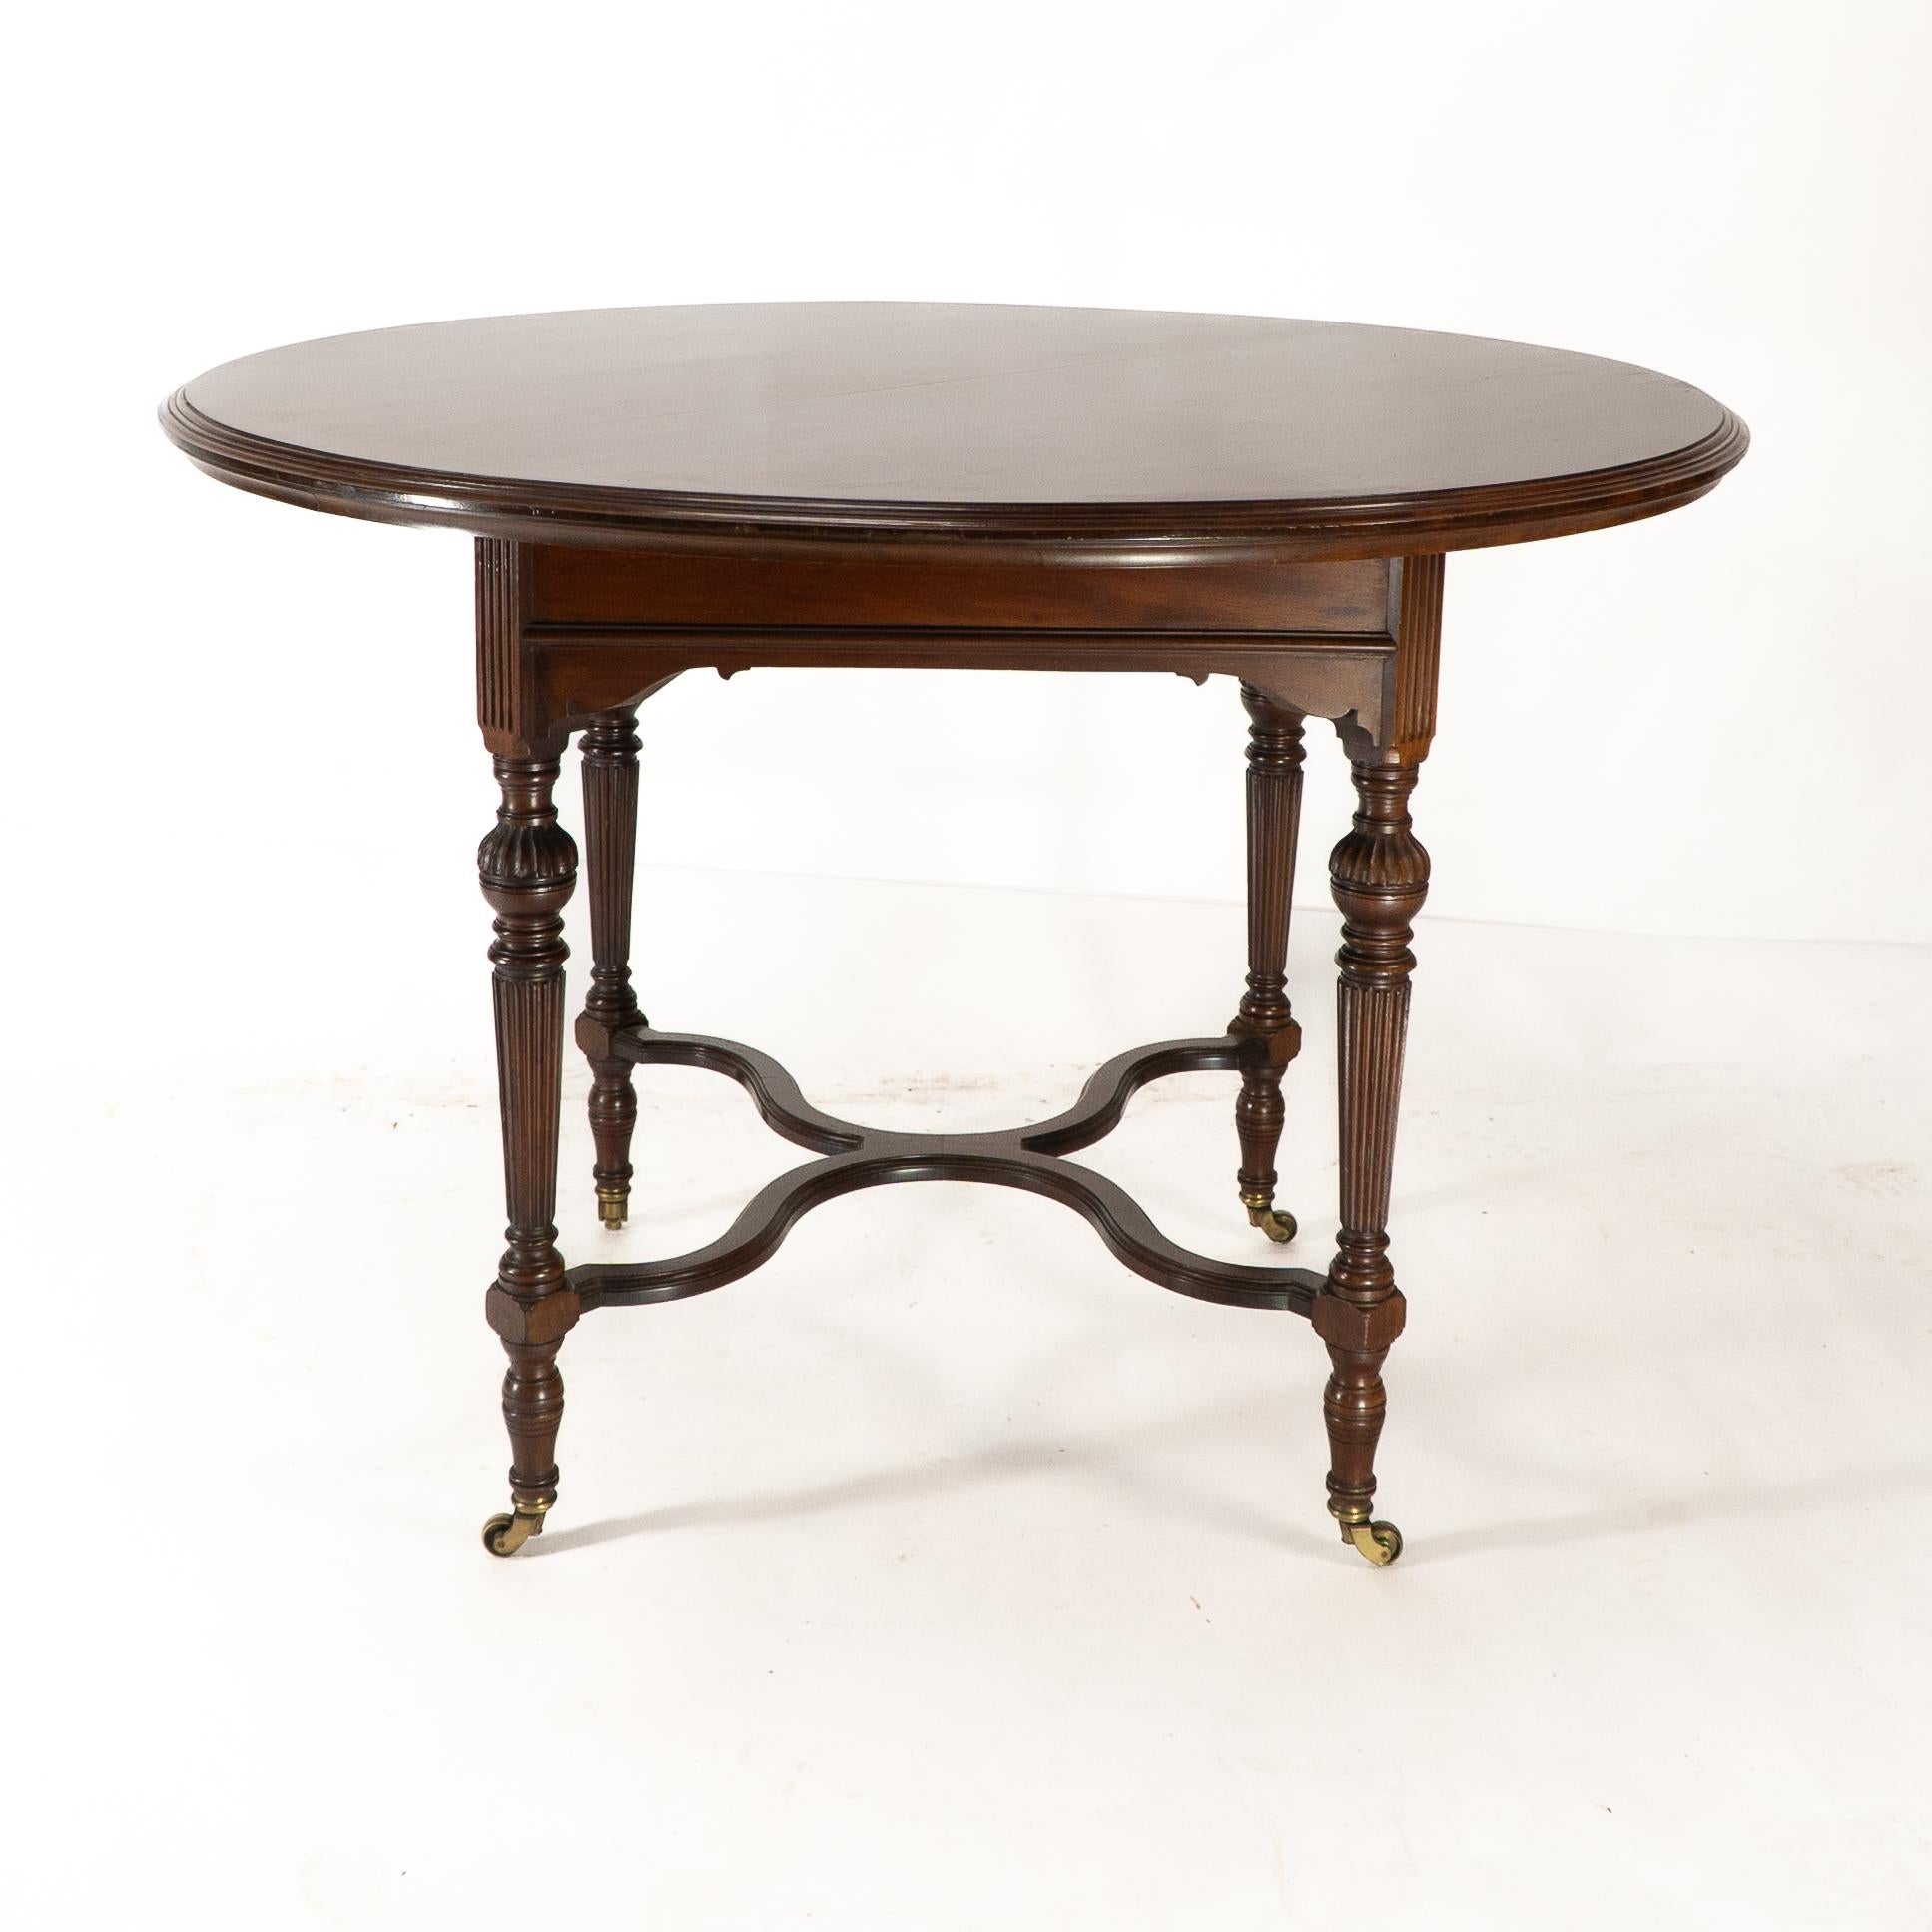 Collinson & Lock attributed. An Aesthetic Movement walnut circular center table For Sale 1